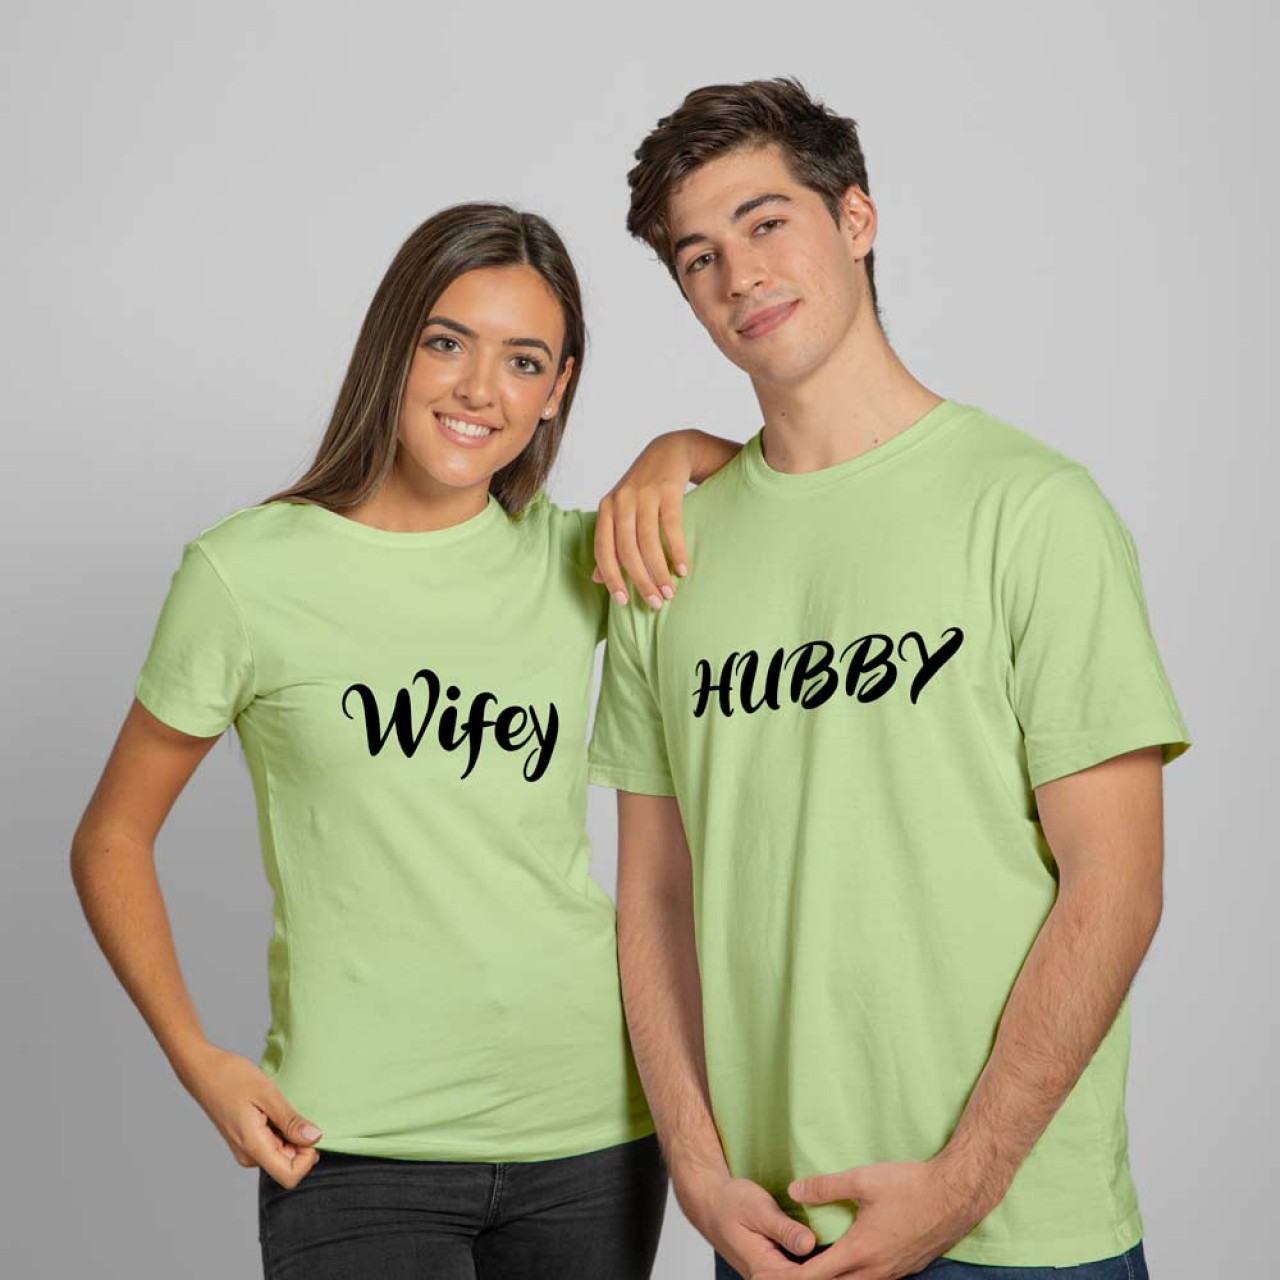 Husband & Wife Cotton T-Shirts For Couples